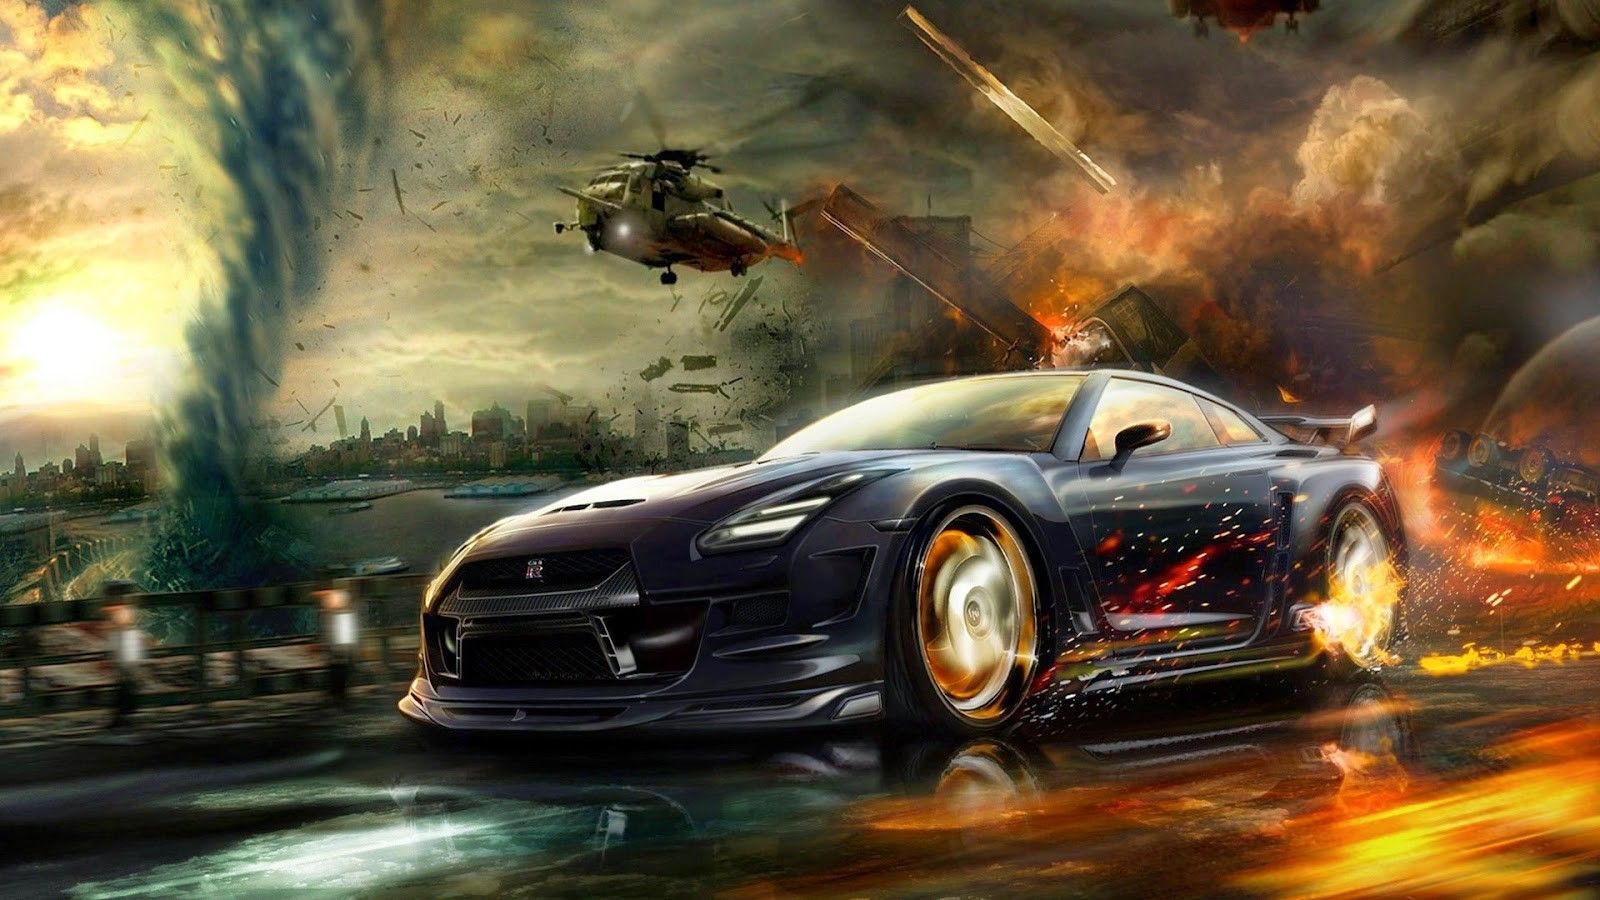 video Games, Rally Cars, Racer, Need For Speed: No Limits, Fantasy Art, Artwork Wallpaper HD / Desktop and Mobile Background